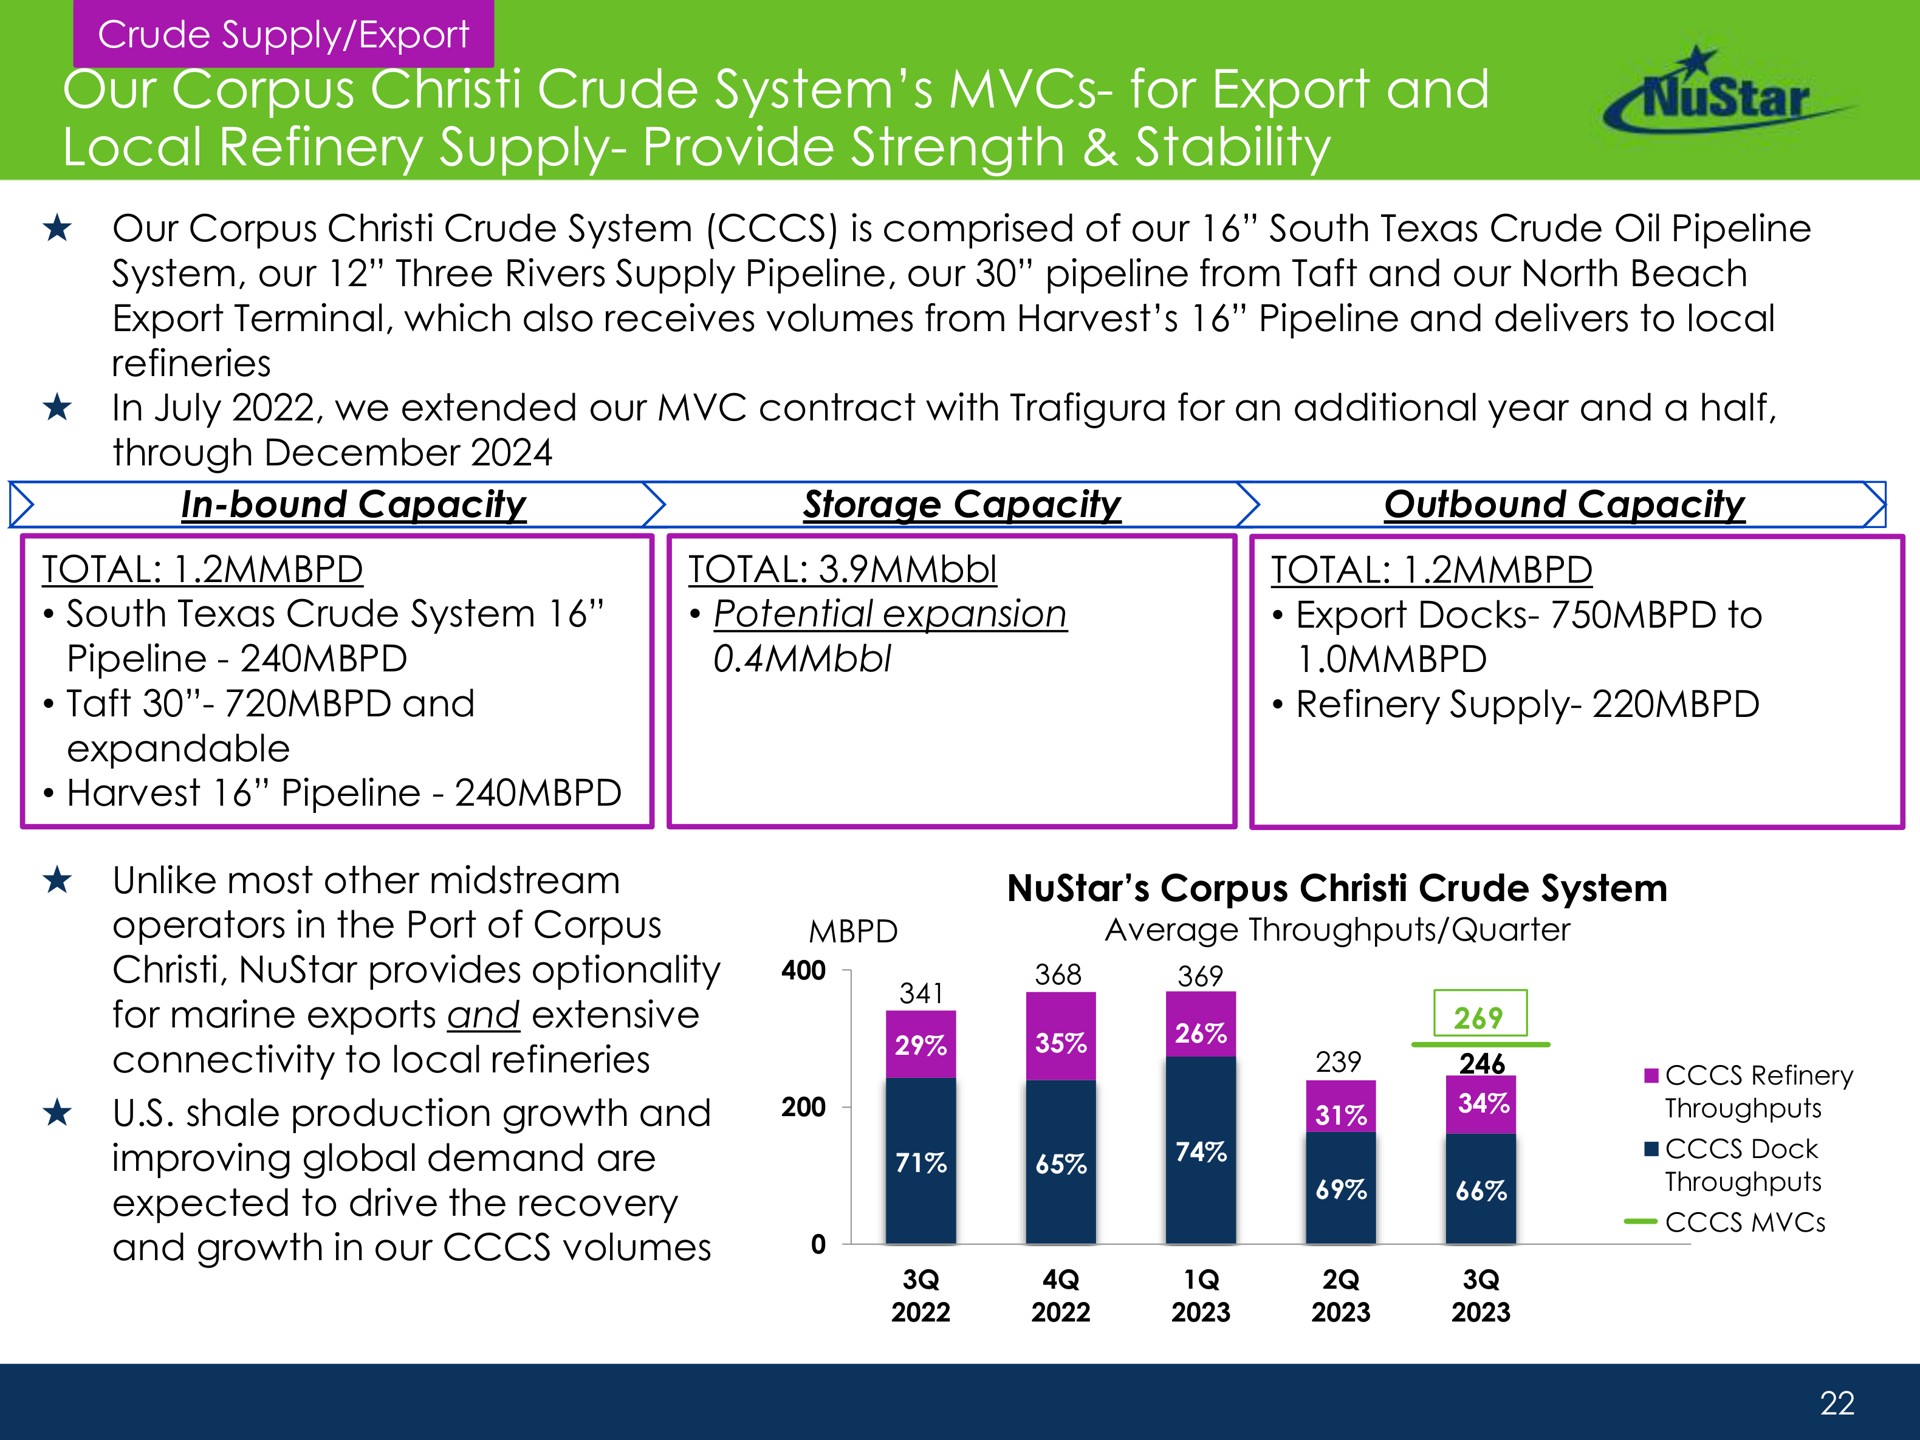 our corpus crude system for export and local refinery supply provide strength stability unlike most other midstream | NuStar Energy